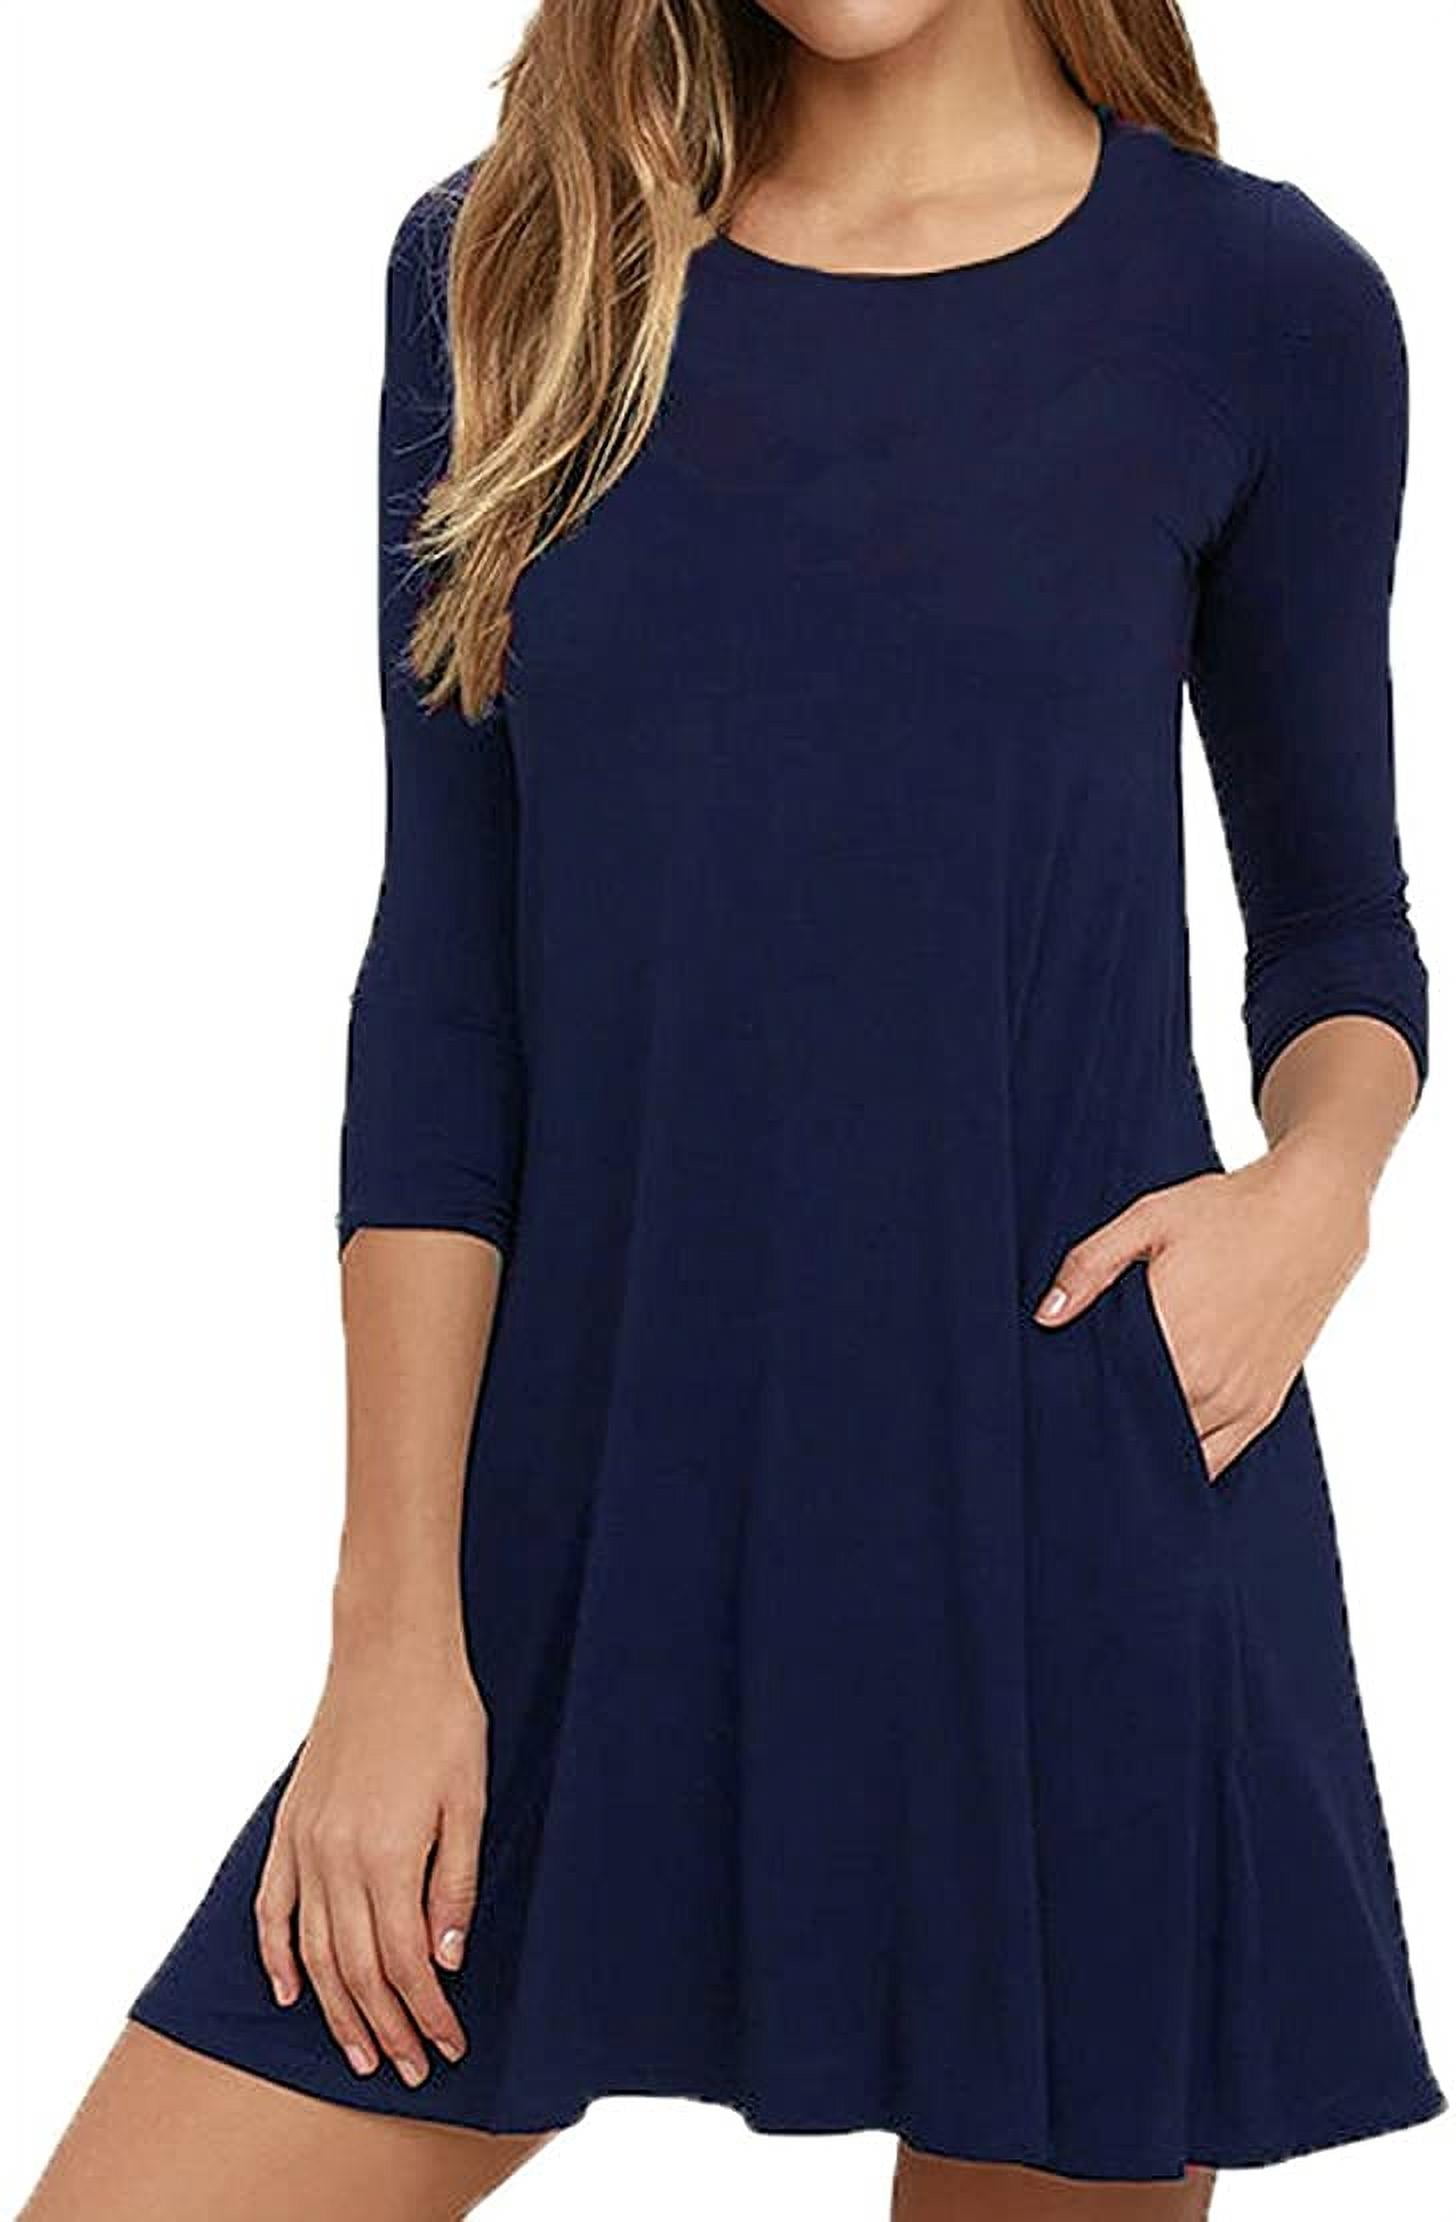 JuneFish Womens Round Neck 3/4 Sleeves A-line Casual Mini Dress with ...